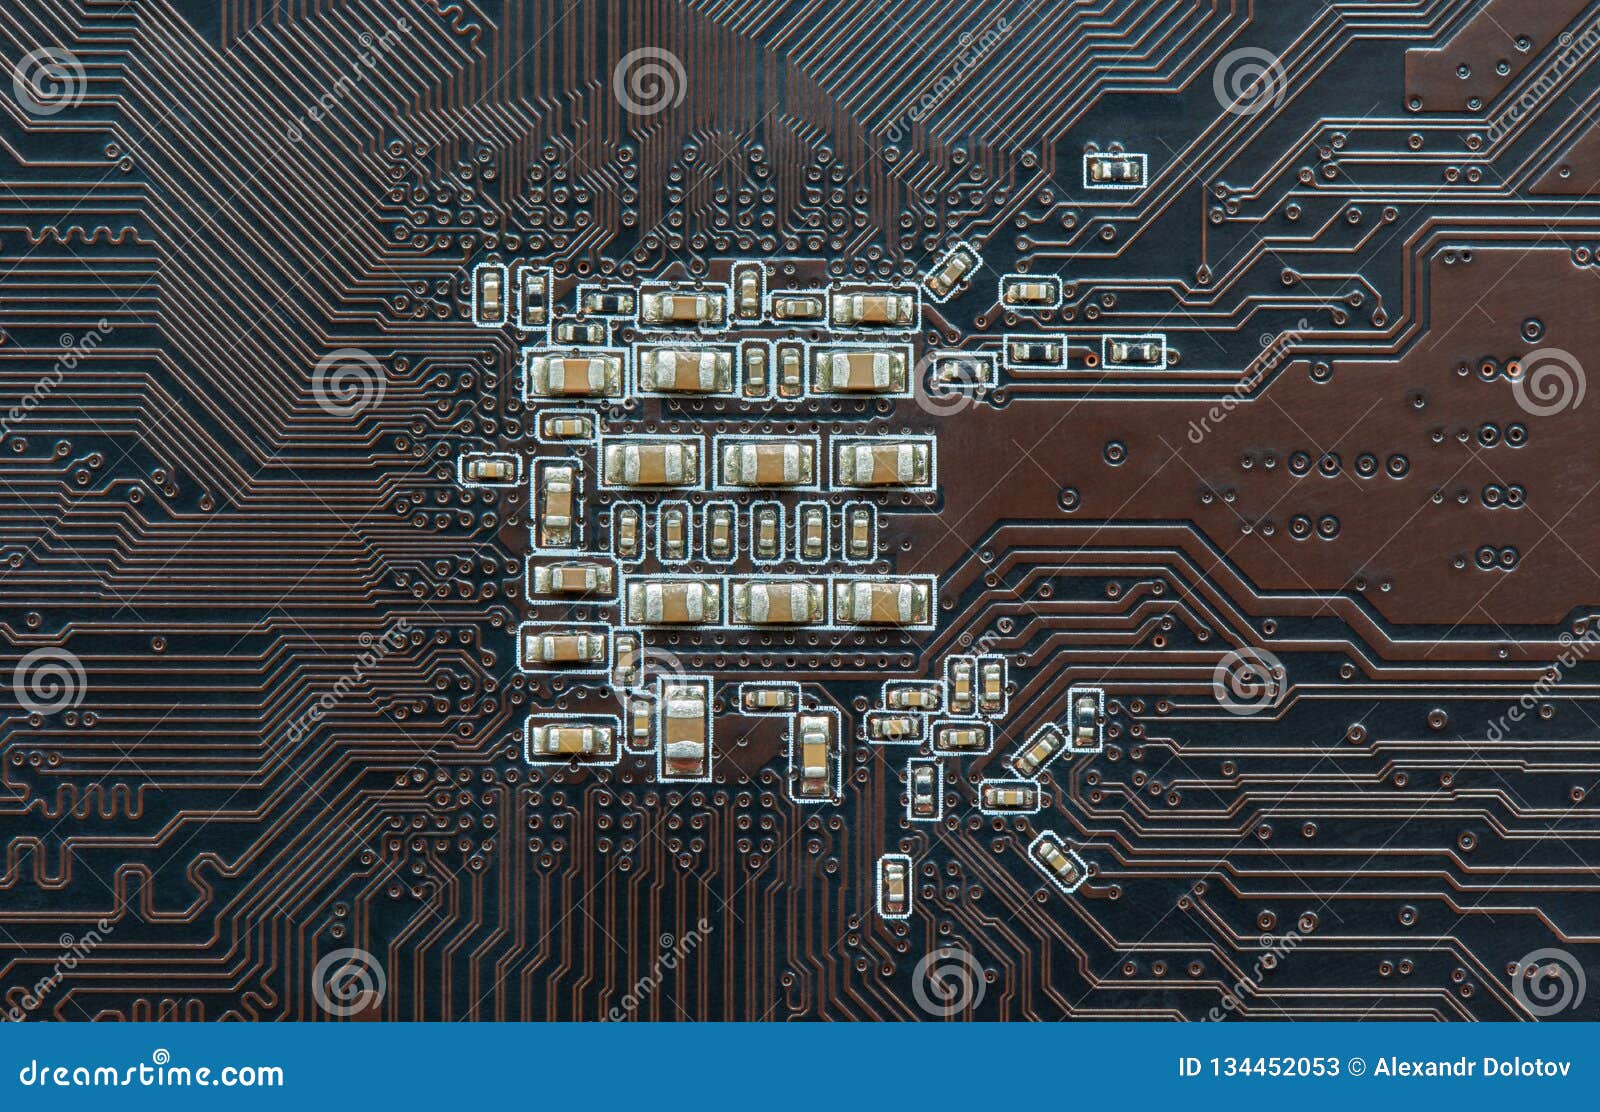 Printed Circuit Board With Electronic Components Stock Image - Image of ...